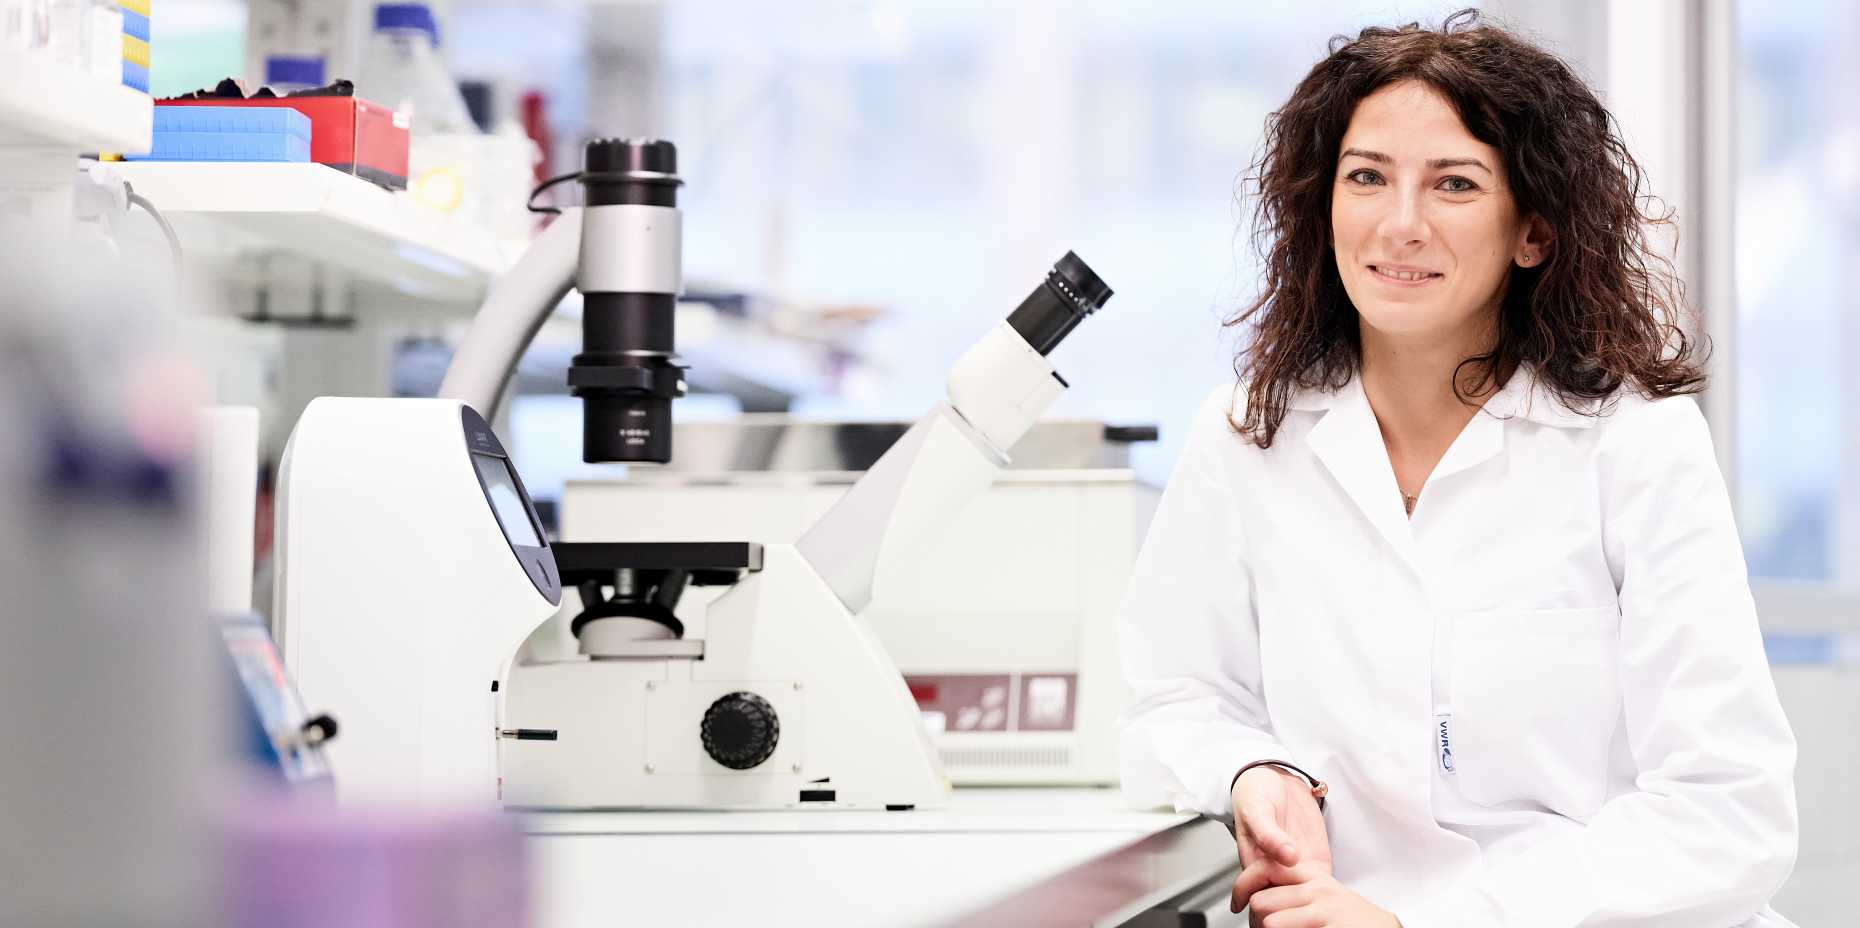 Daniela Latorre conducts research at the Institute for Research in Biomedicine. (Photograph: Stefan Weiss / ETH Zurich)